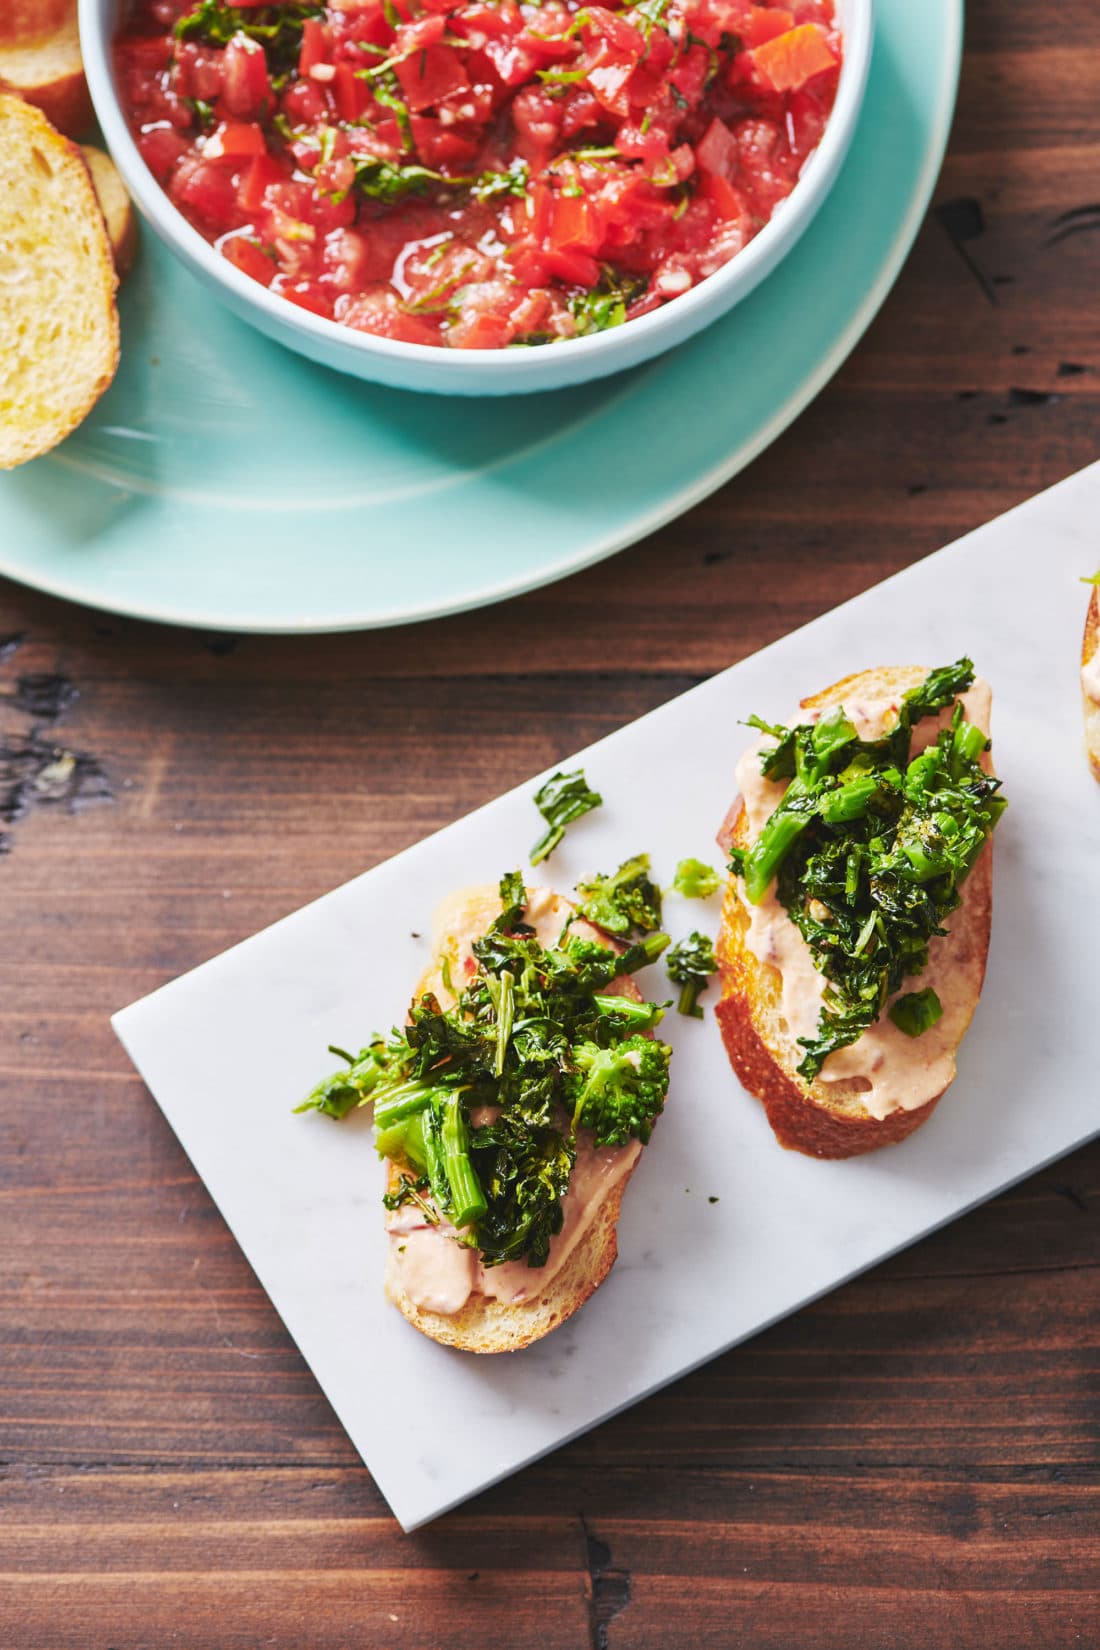 Broccoli Rabe Crostini with Chipotle Sauce on a plate on a wooden table.